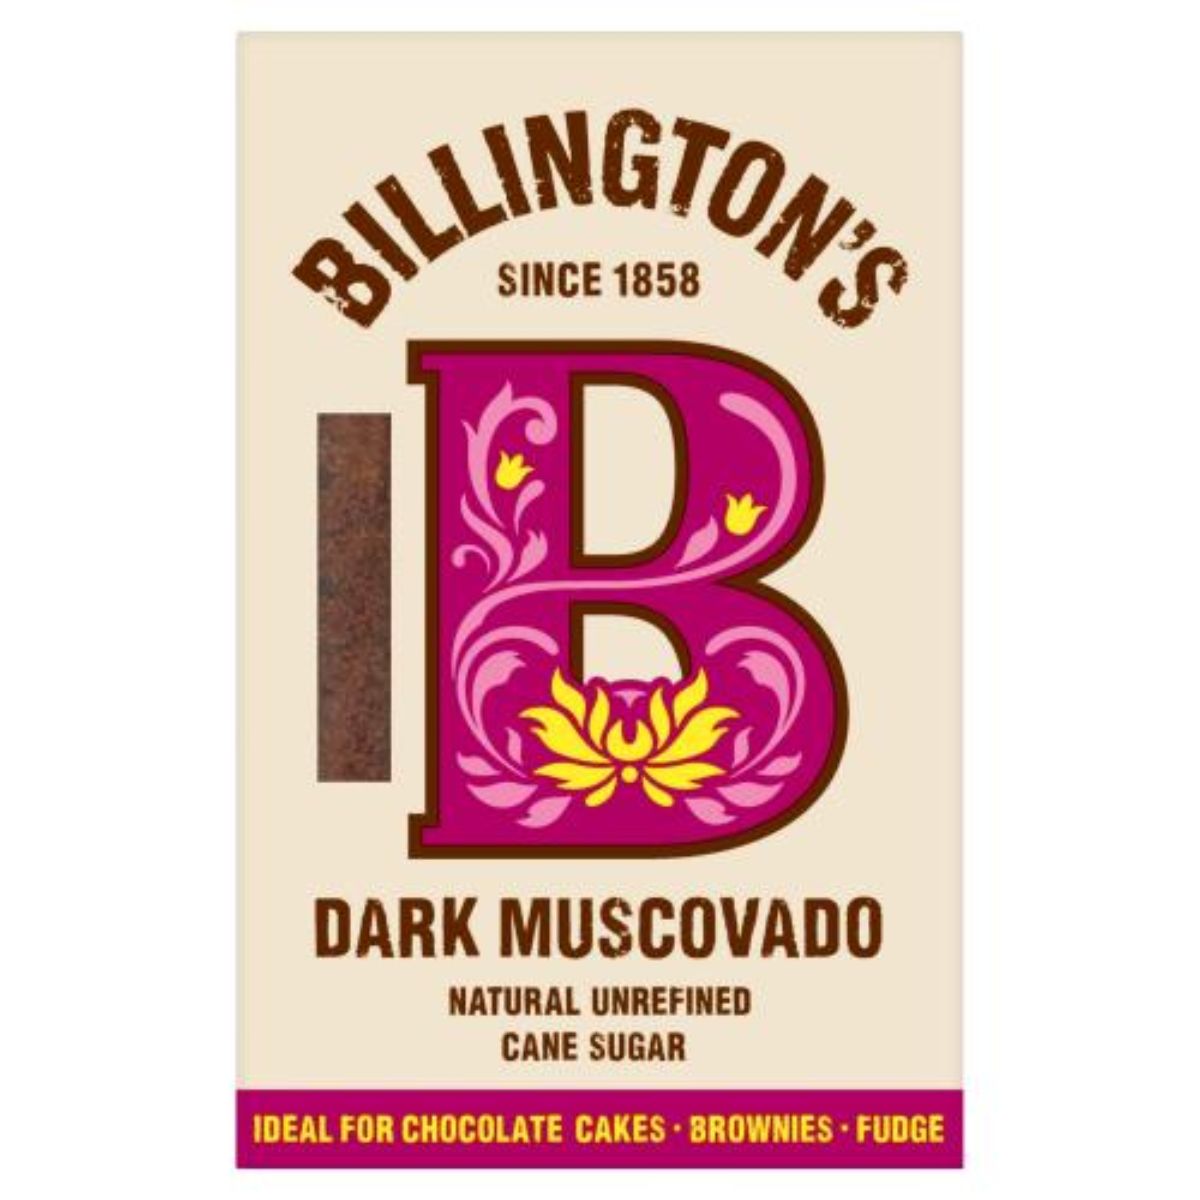 A package of Billington's Dark Muscovado Sugar - 500g, ideal for chocolate cakes, brownies, and fudge.